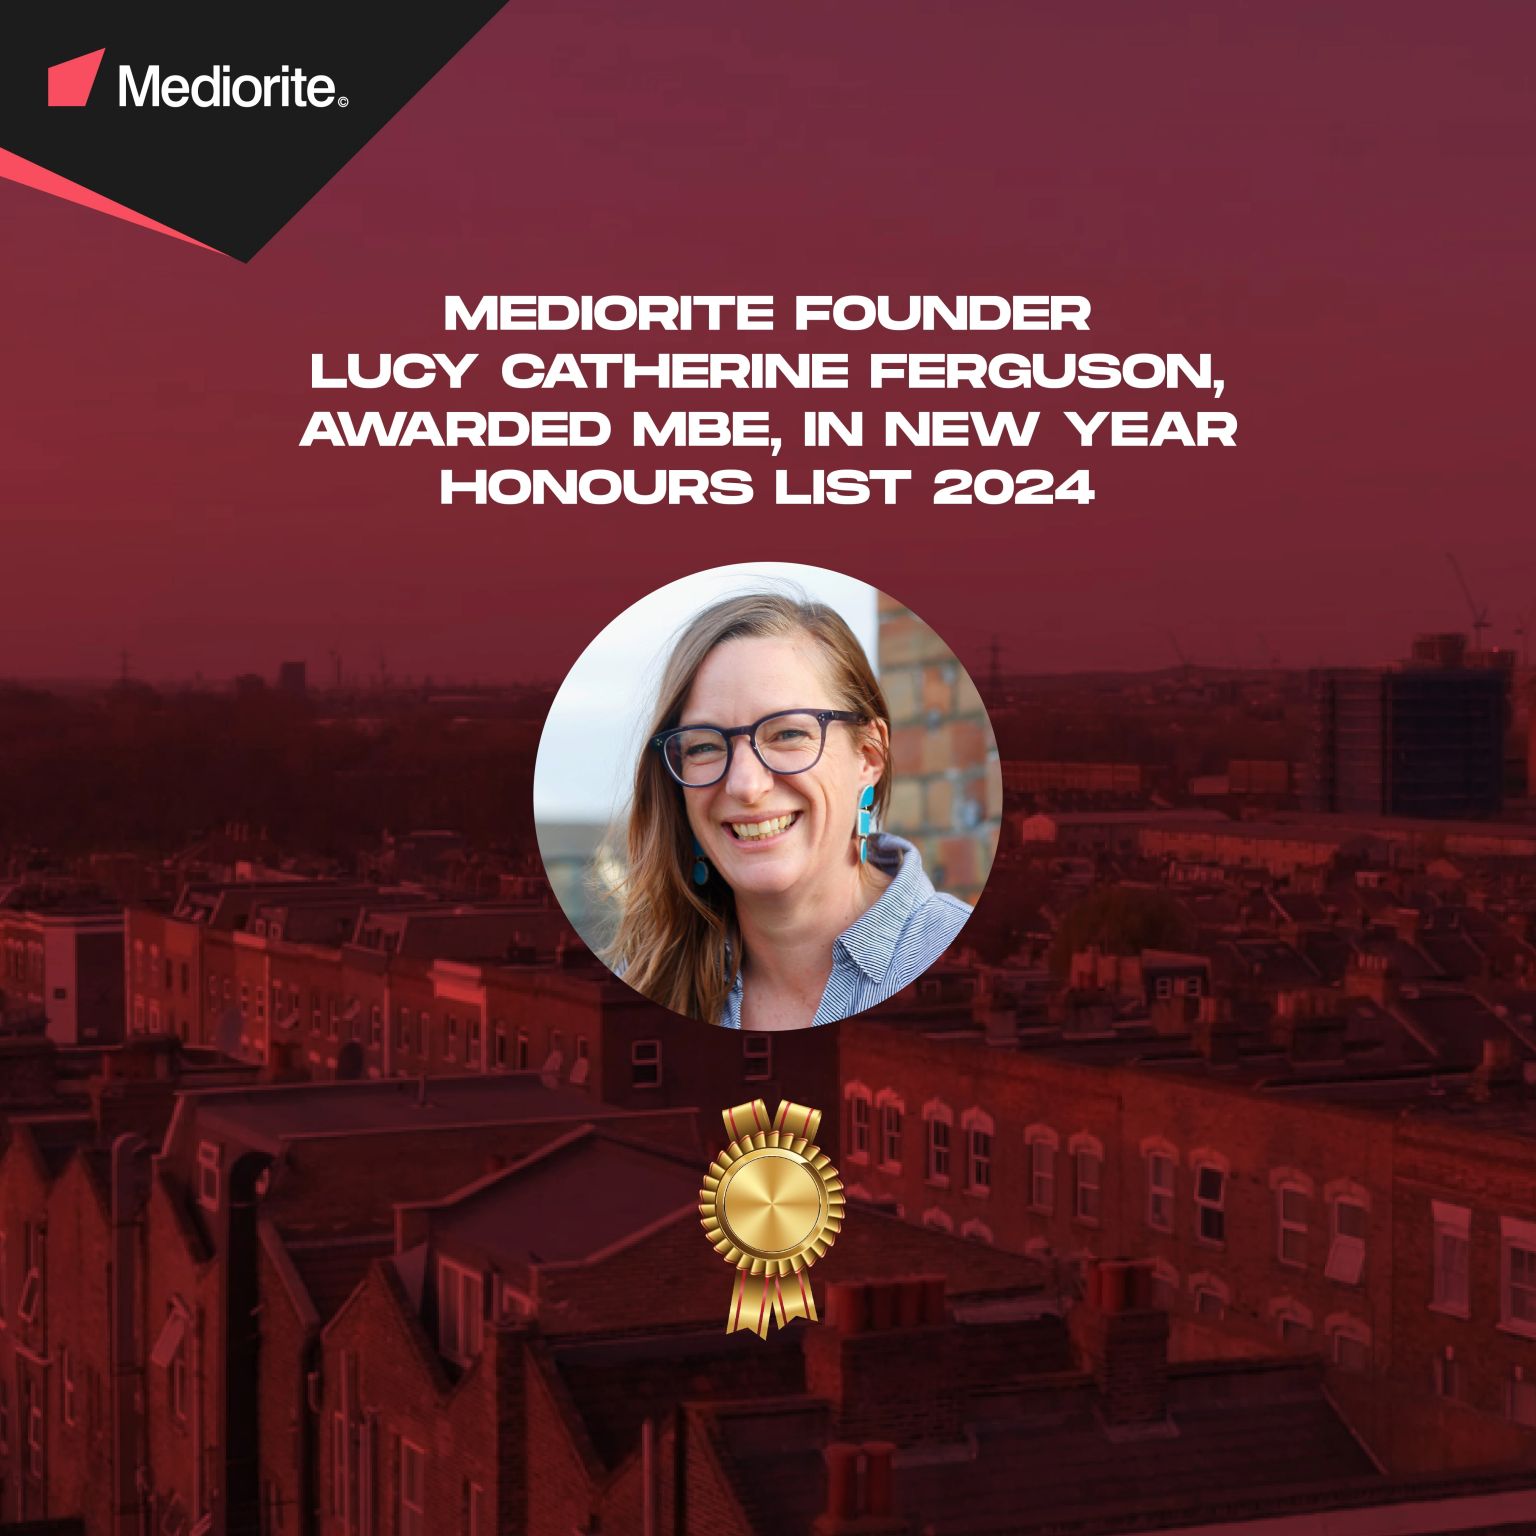 Mediorite founder Lucy Catherine Ferguson awarded MBE in New Year Honours List 2024